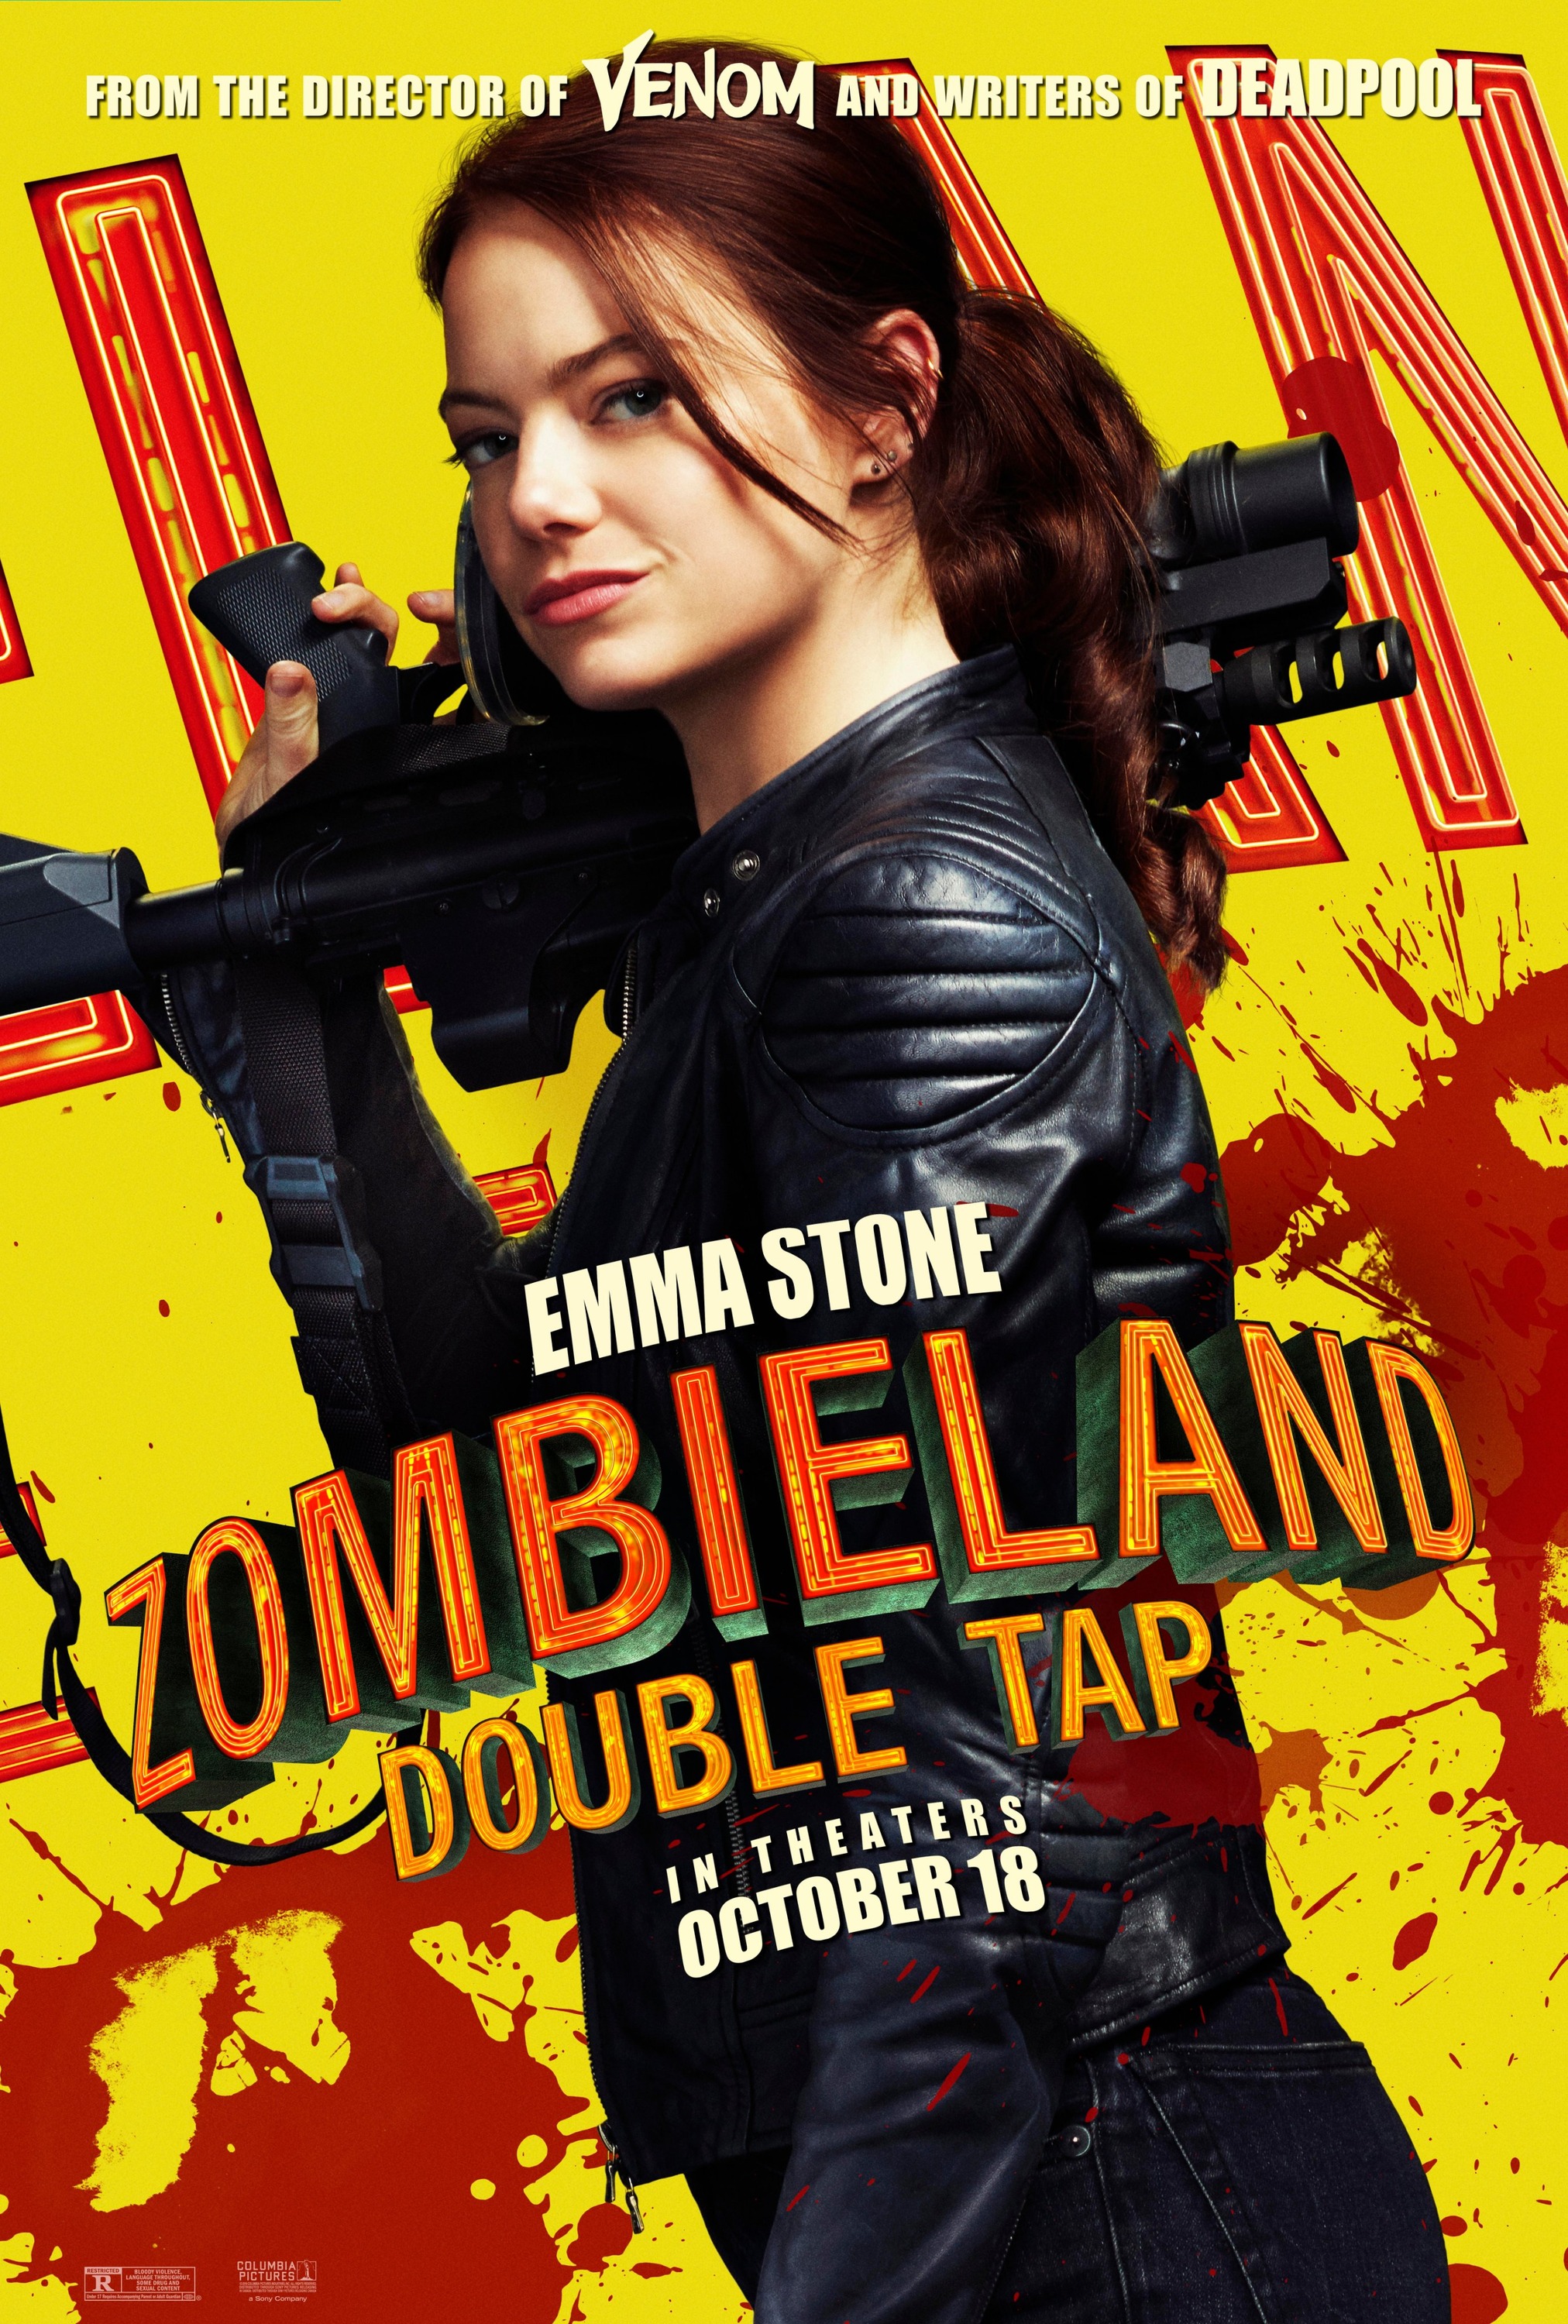 Zombieland Double Tap Wallpapers